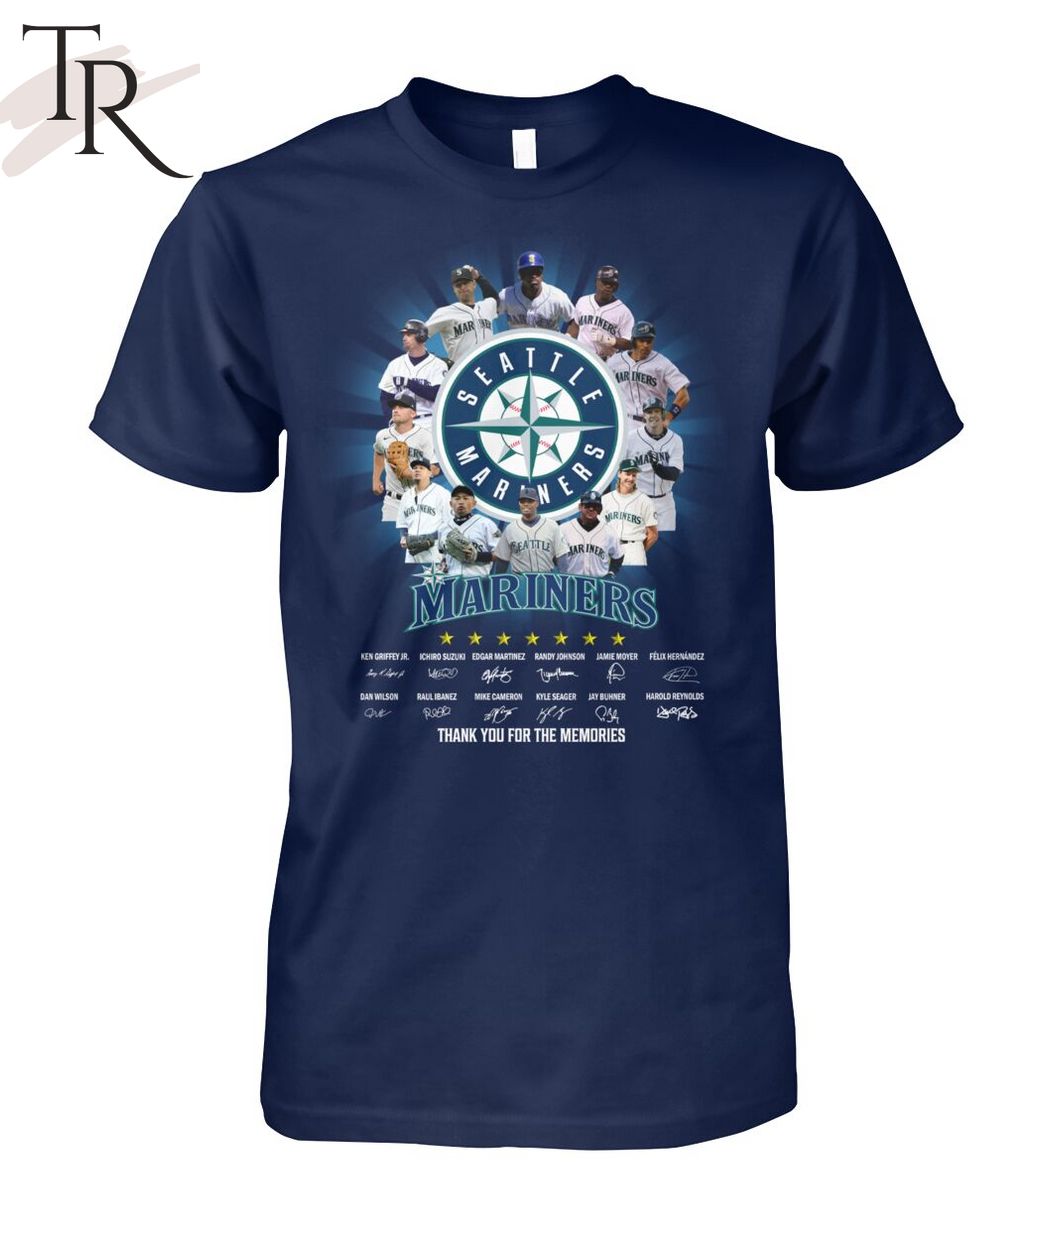 Seattle Mariners Thank You For The Memories T-Shirt - Torunstyle